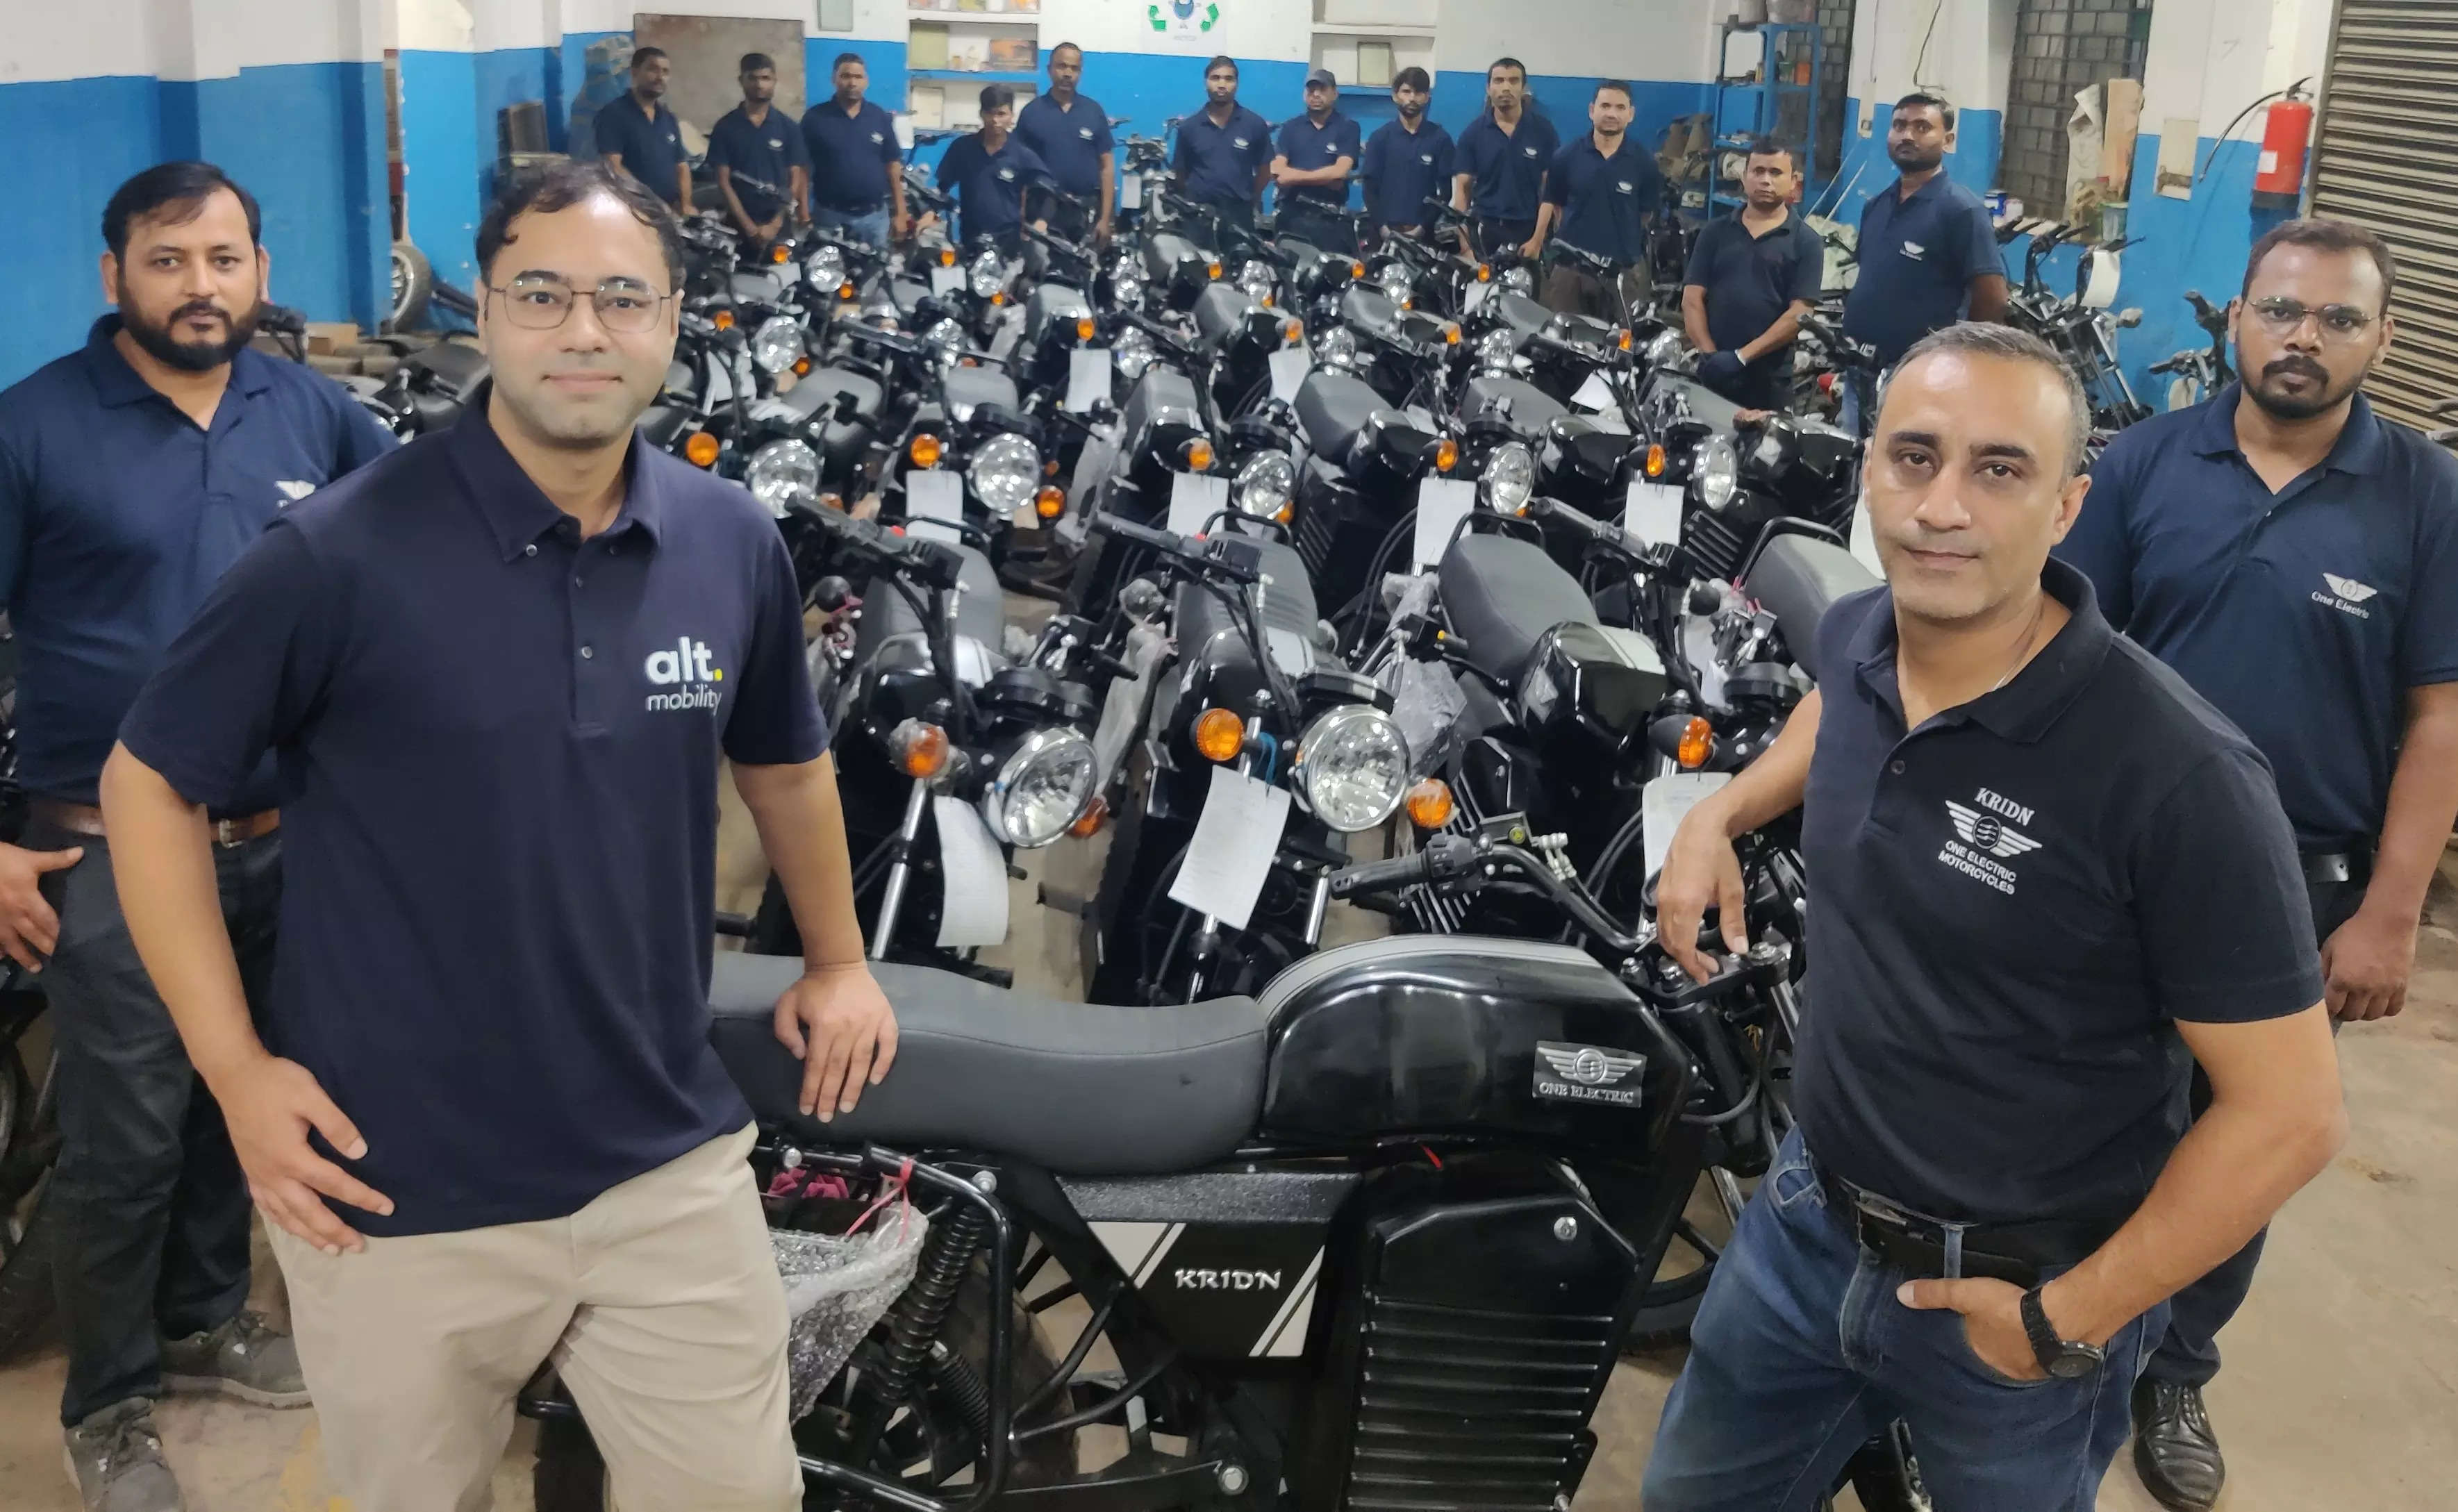 <p>One Electric Motorcycles and ALT Mobility are aiming to provide confidence to their clients looking for over 5 years of vehicle life.</p>